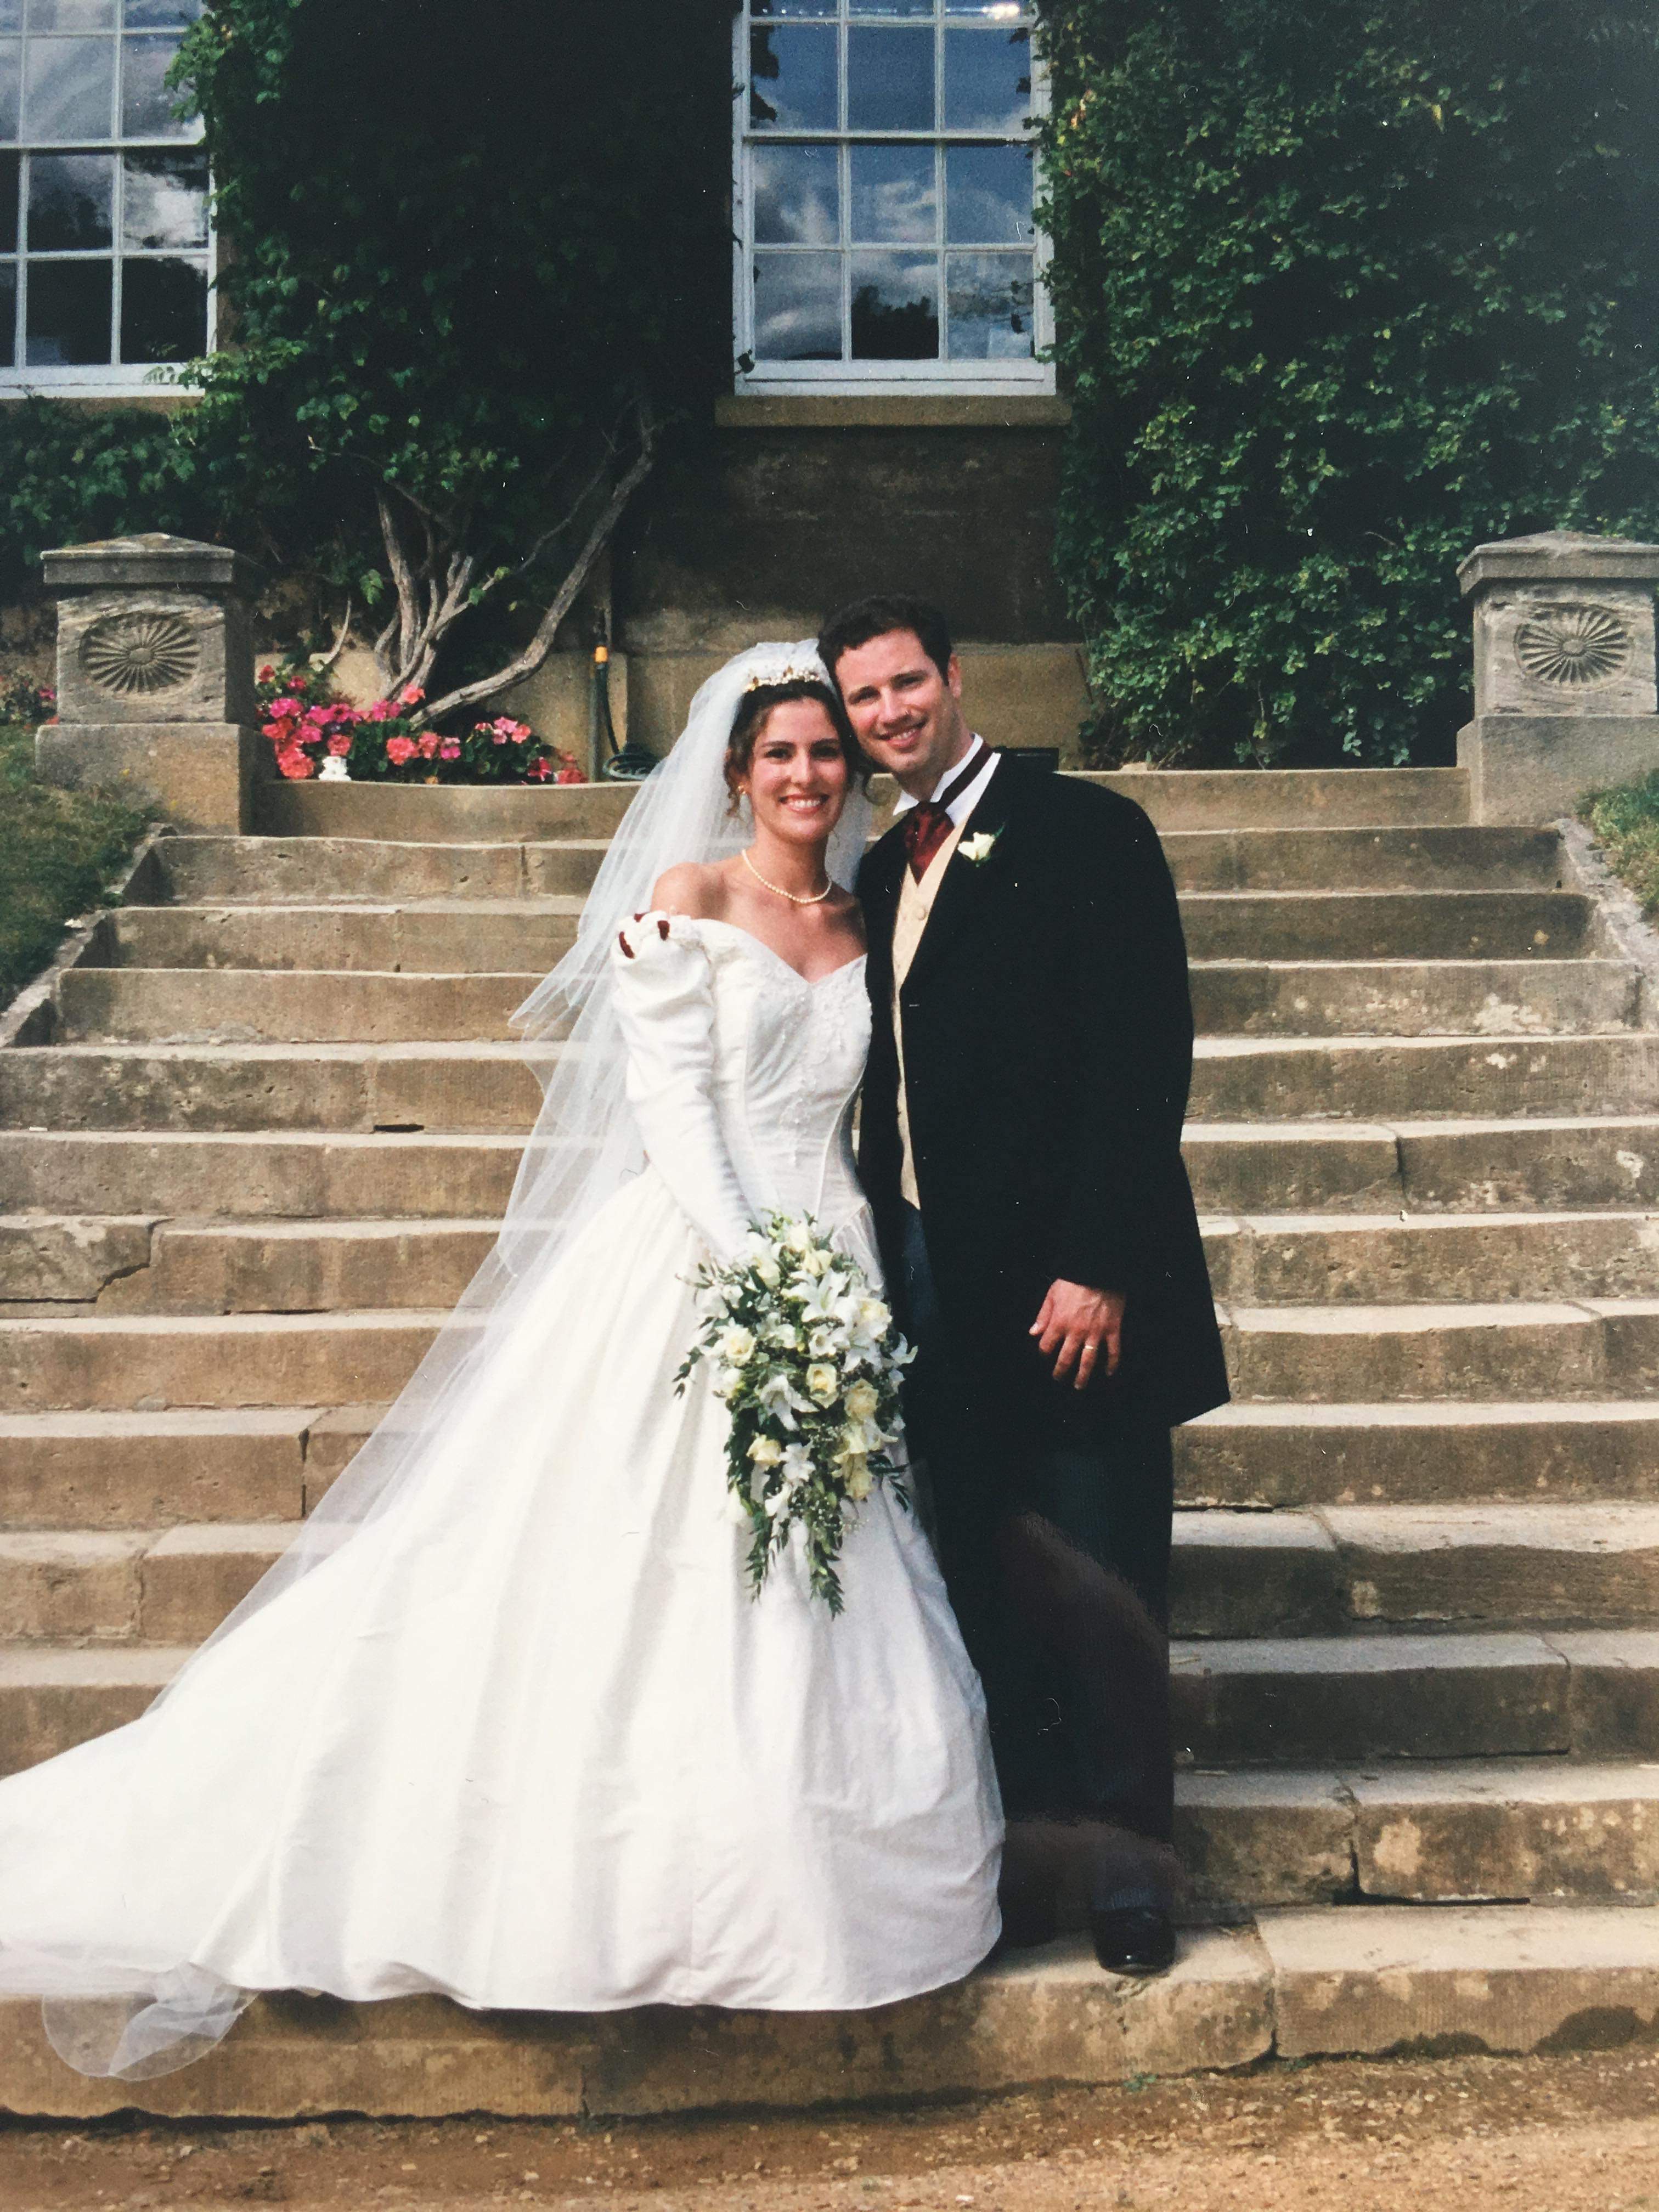 Judith and Rob on their wedding day in 1998 at Worcester College.